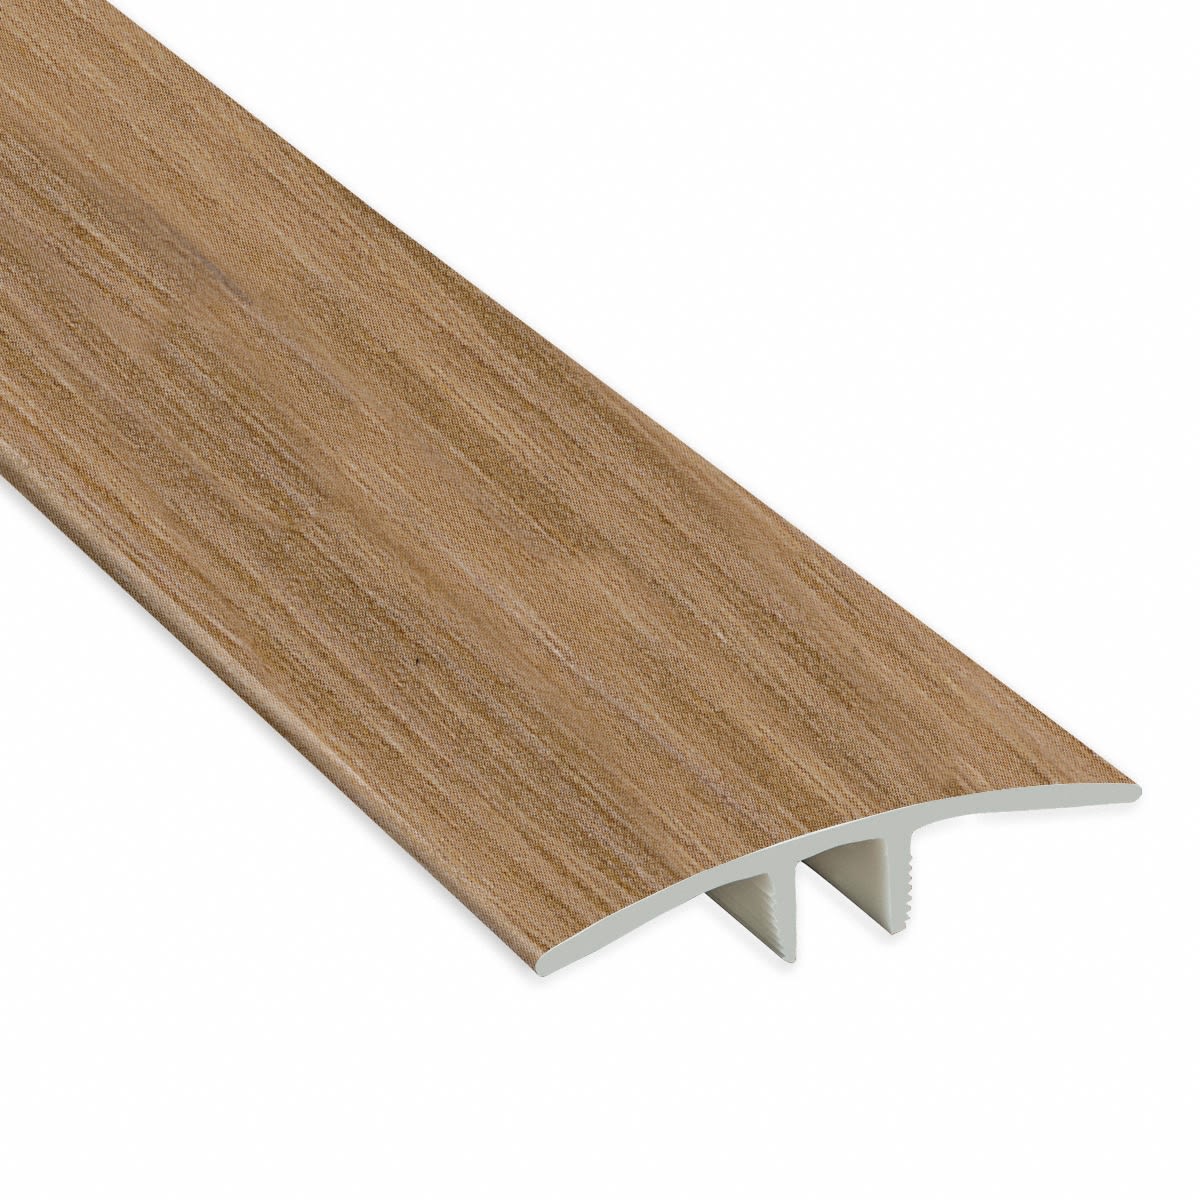 Mojave Hickory Vinyl Waterproof 1.75 in wide x 7.5 ft Length T-Molding